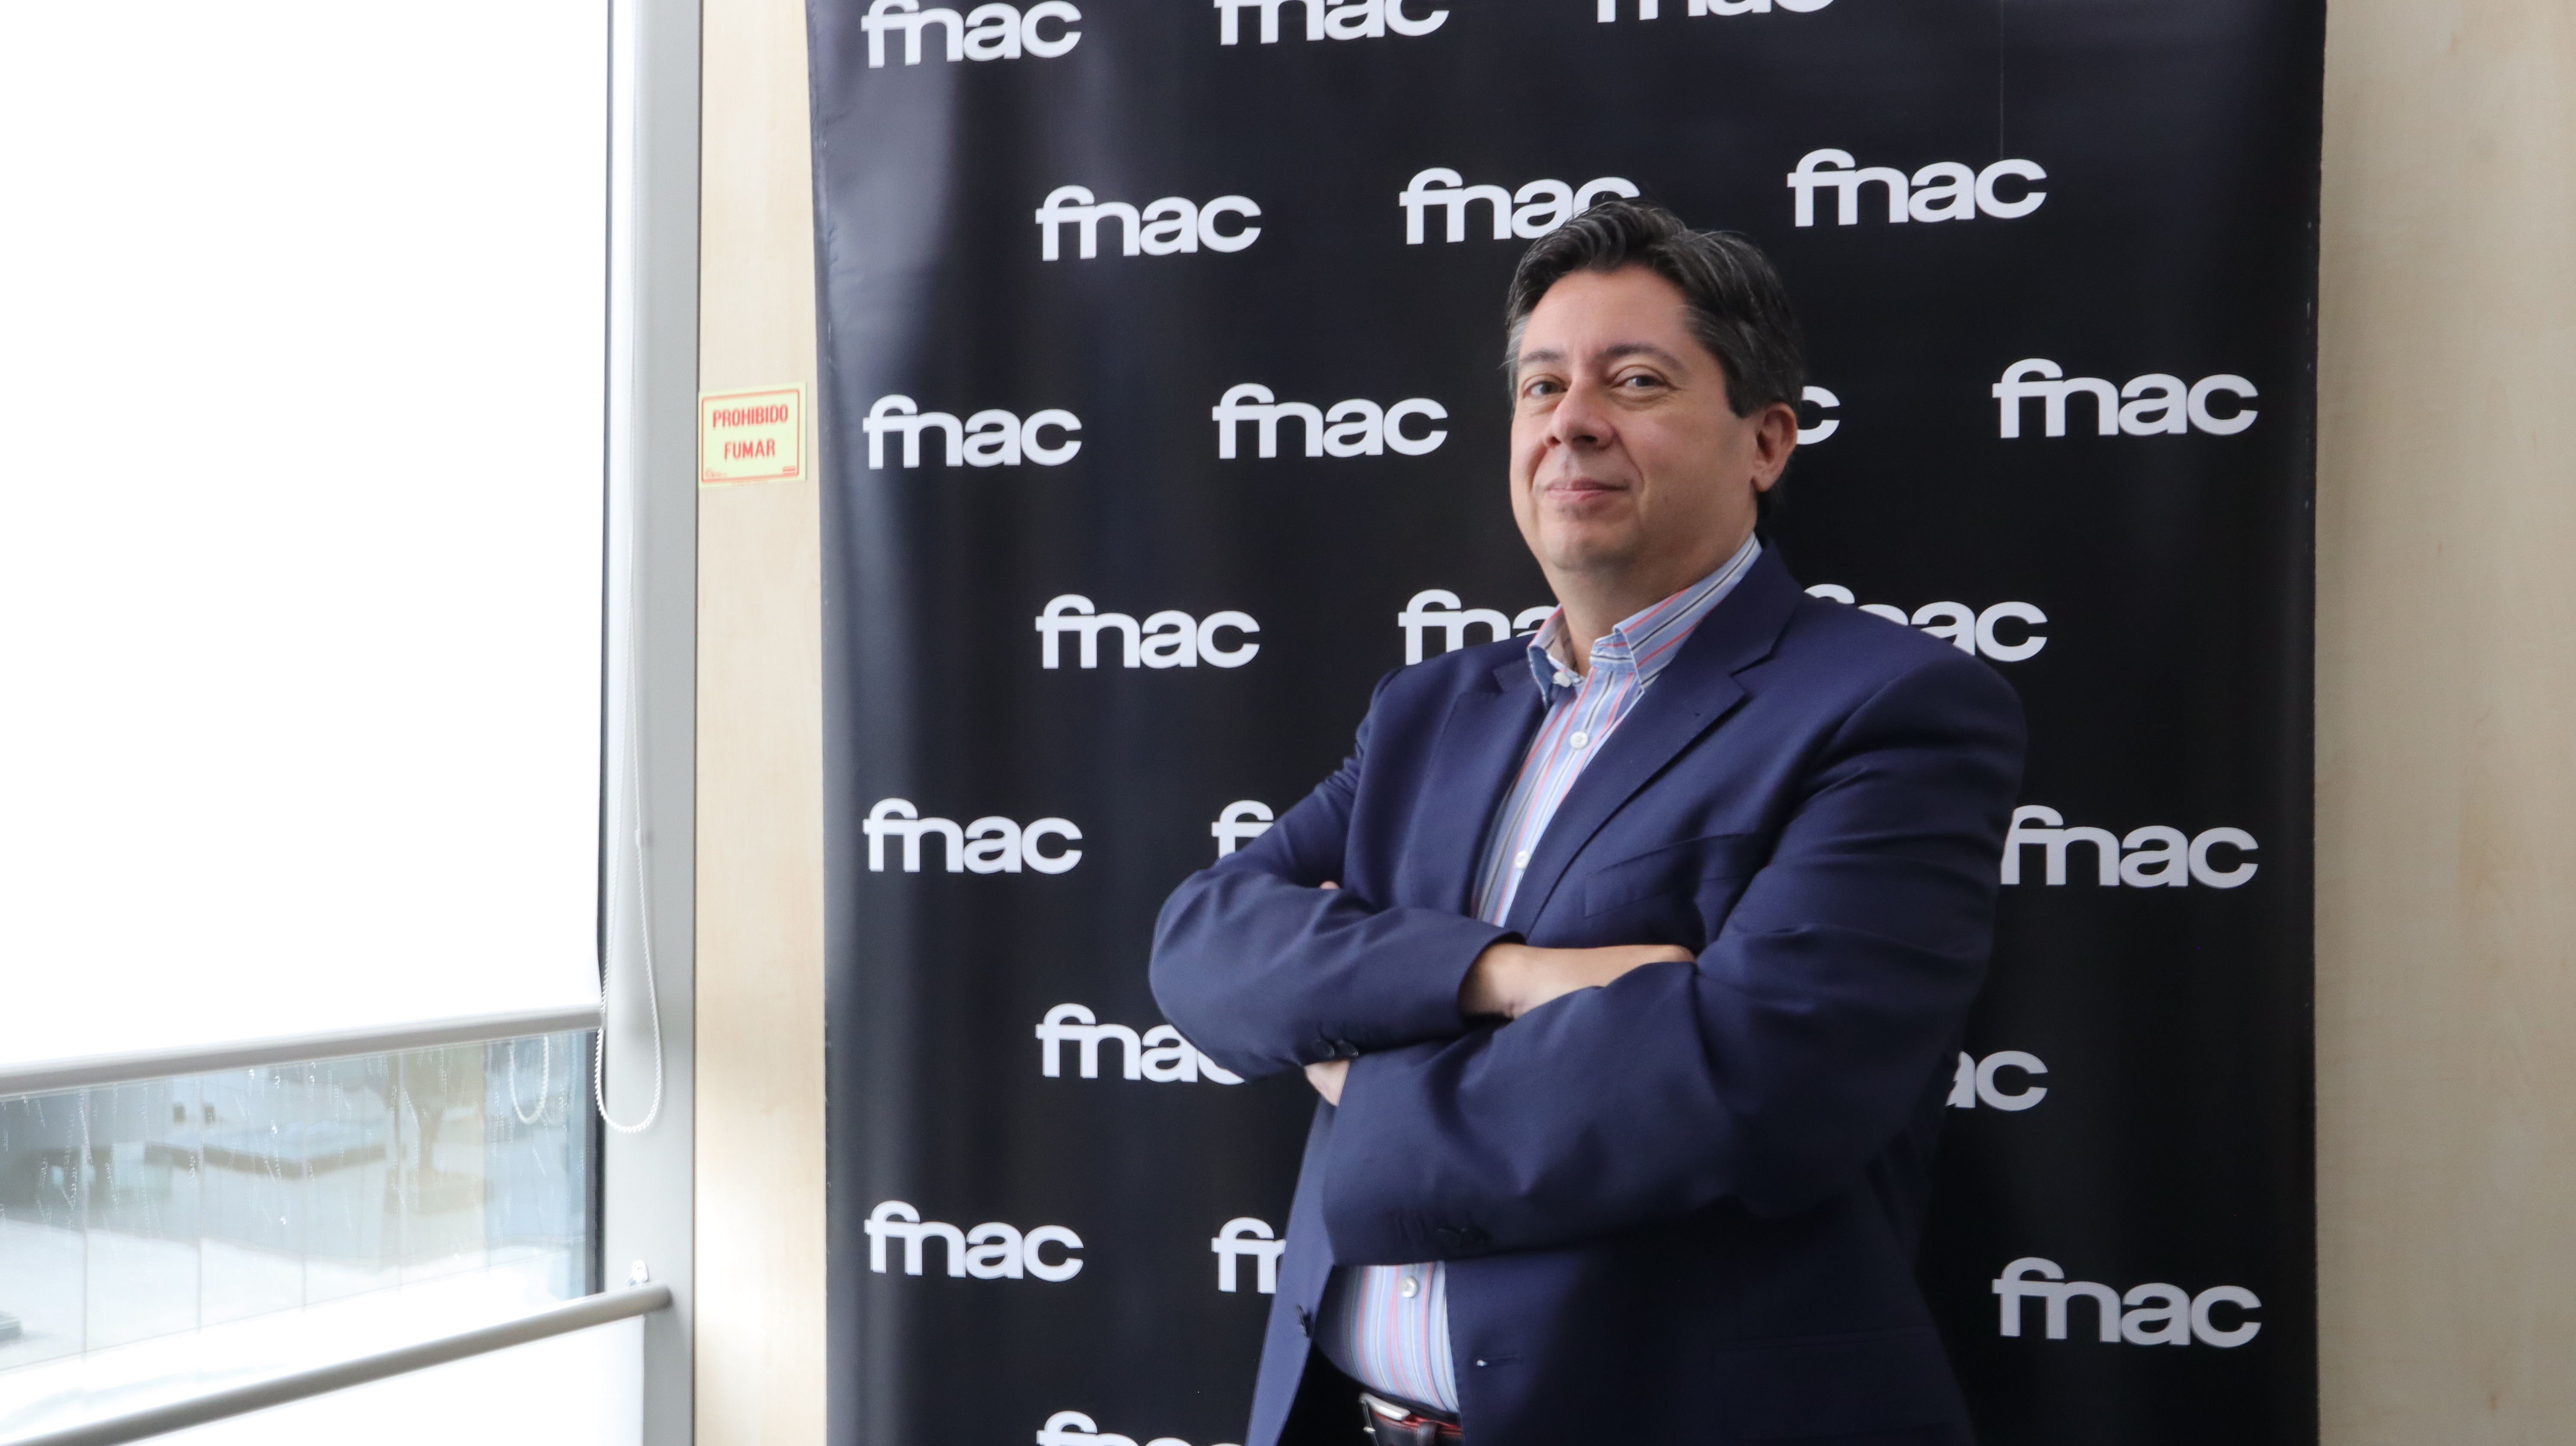 Armando Gómez, responsible for Well-being and Occupational Health at Fnac.